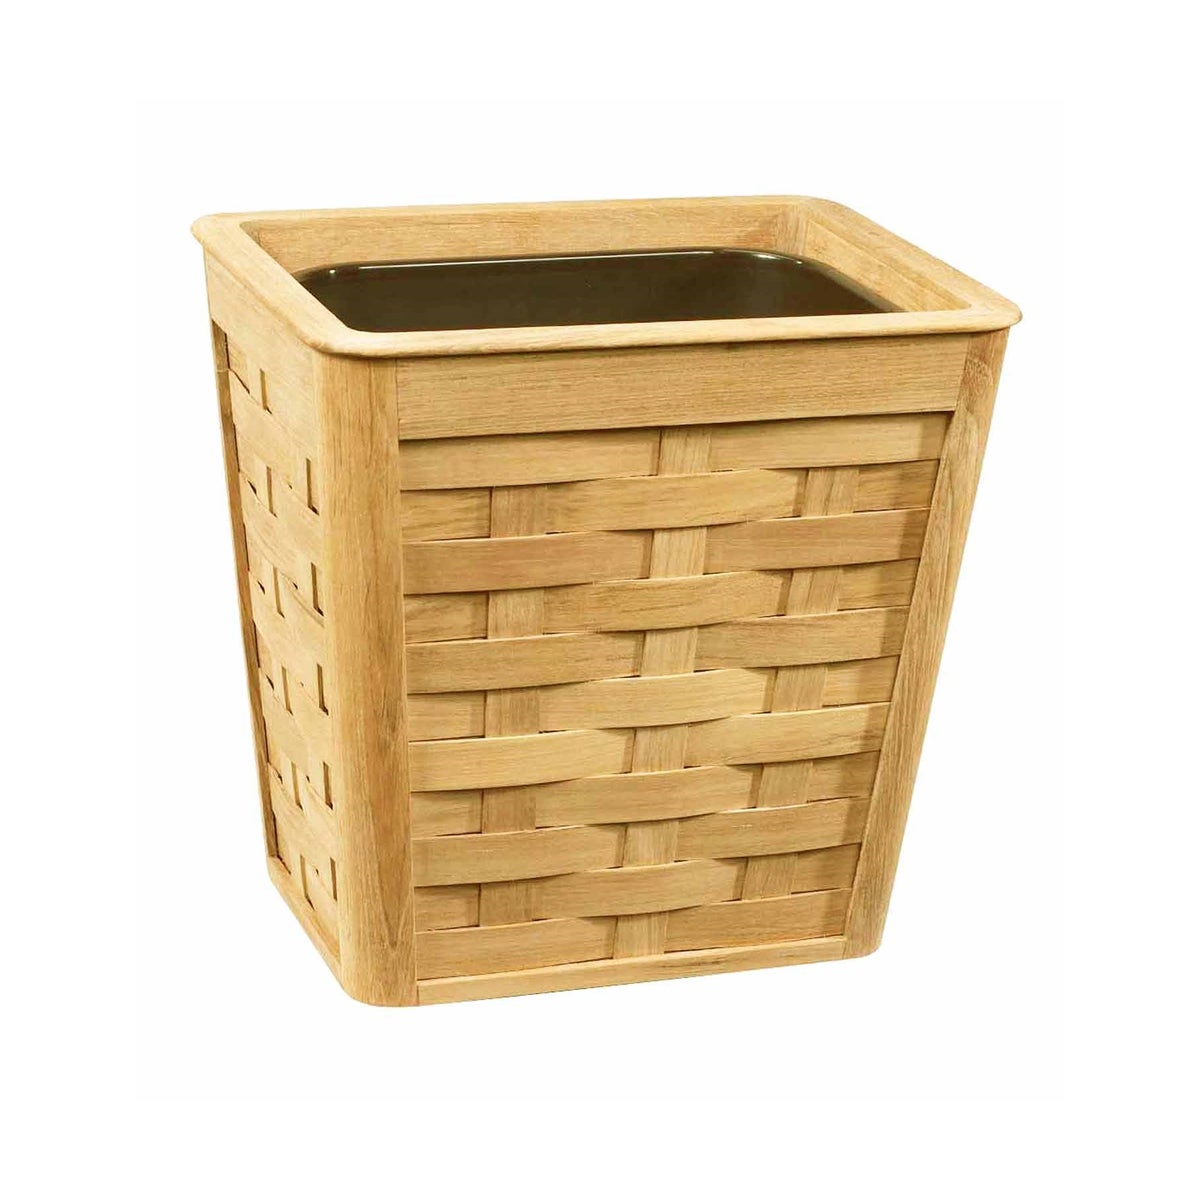 Woven Wastebasket in Natural